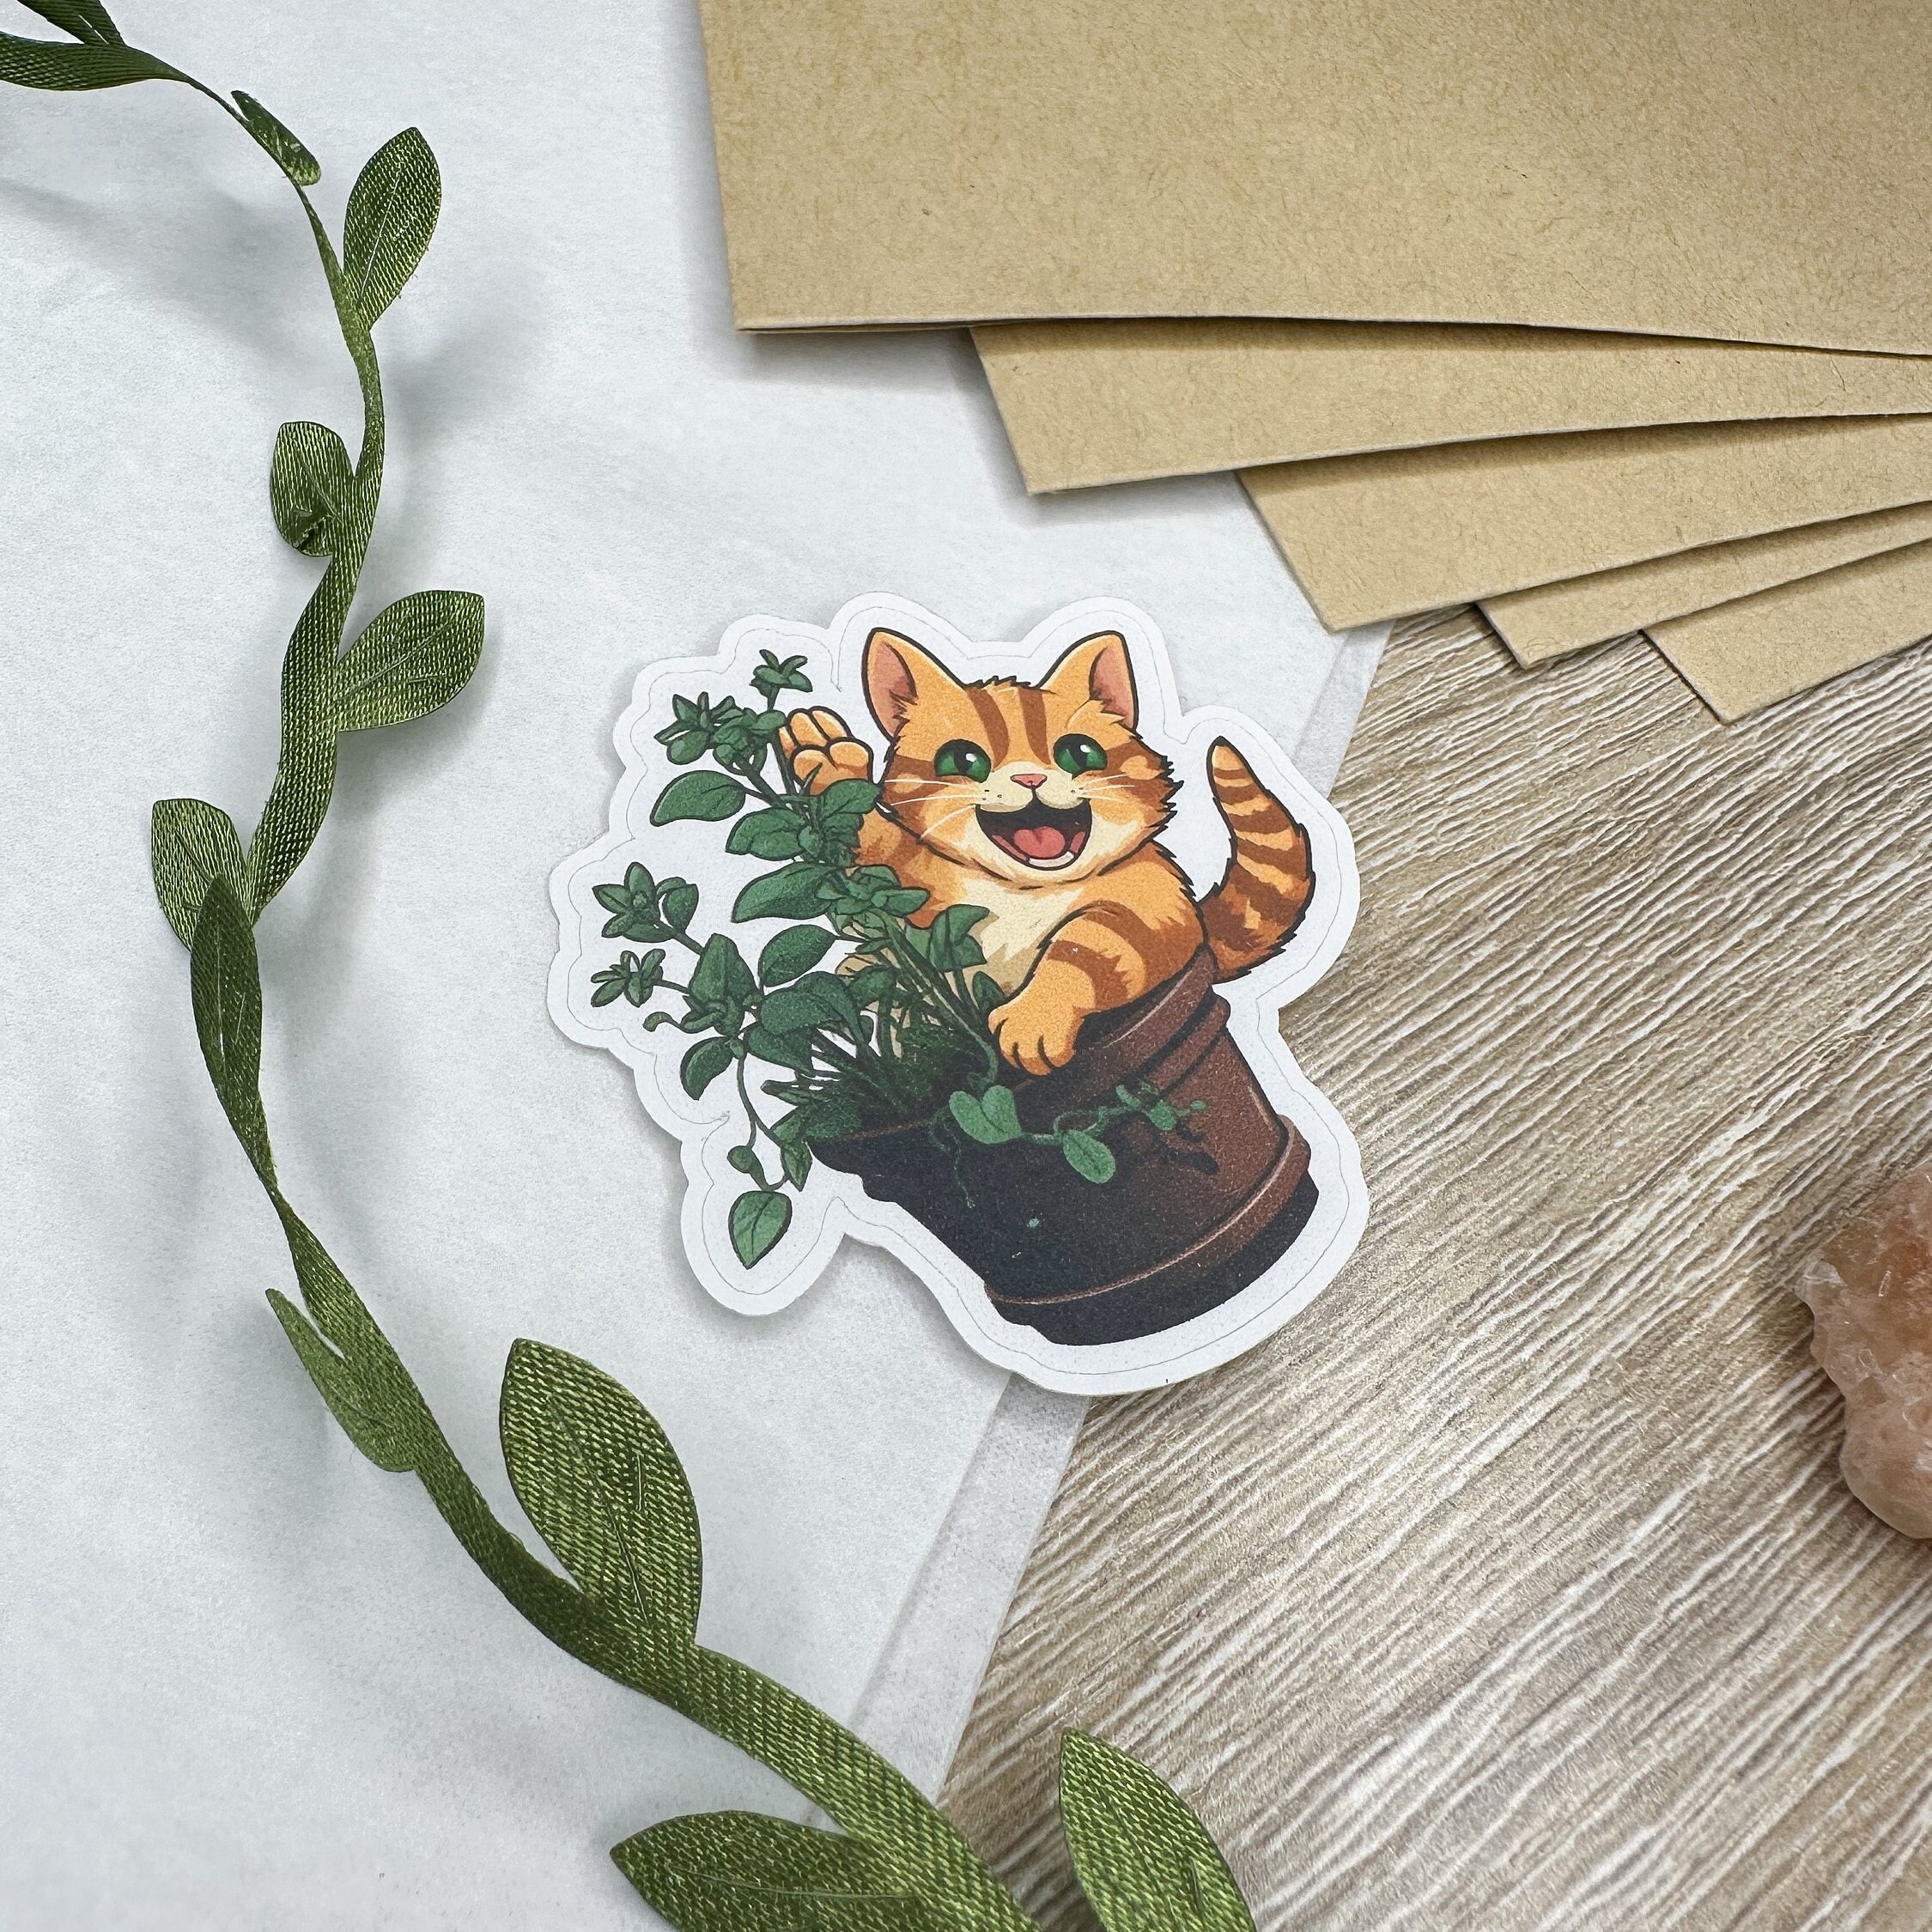 I made these silly stickers (shout-out to all very smart cats) 🍊 : r/cats